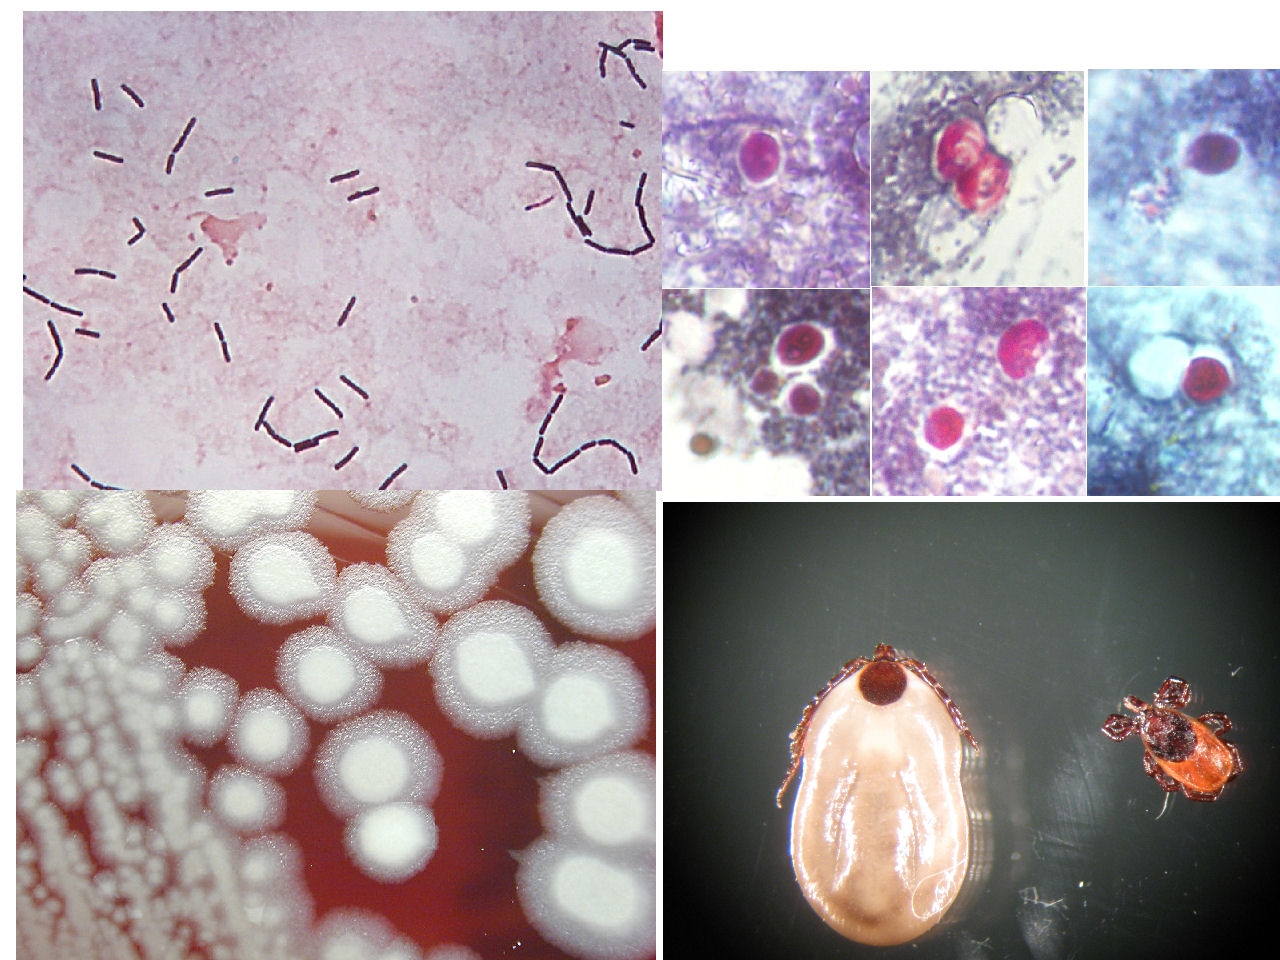 Collage of microbiology images